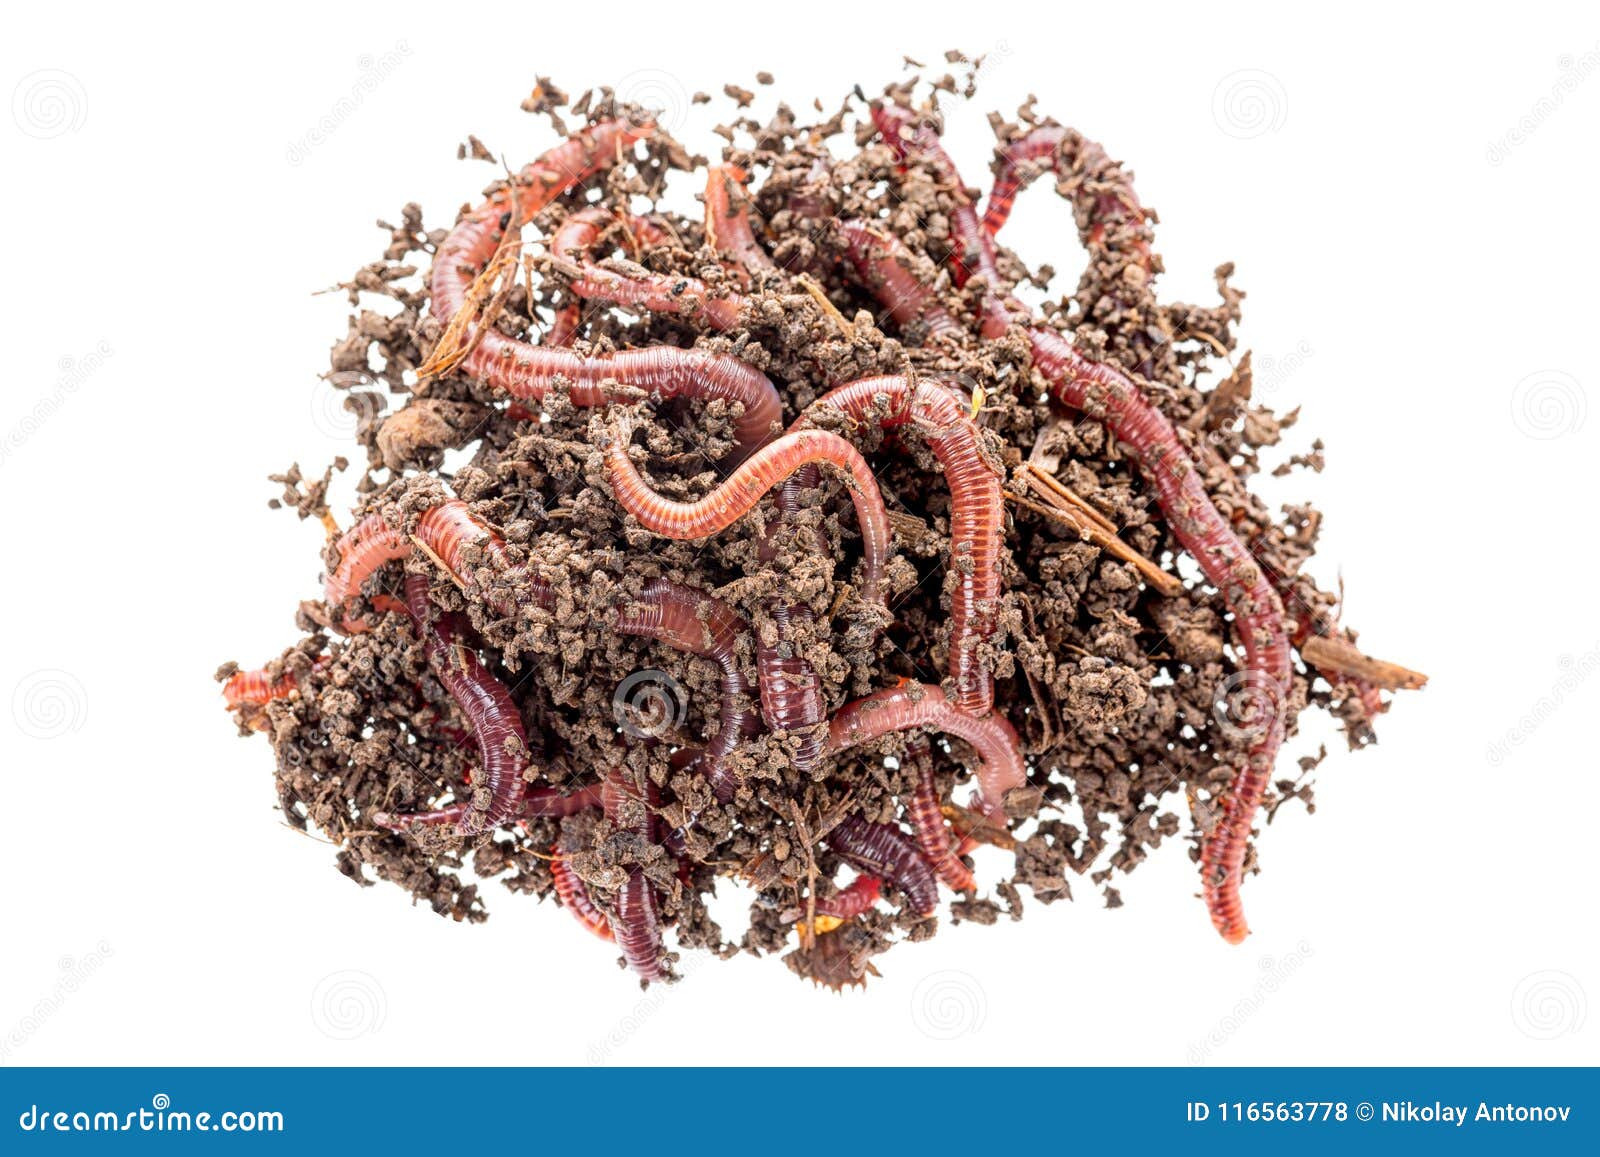 Macro Shot of Red Worms Dendrobena in Manure, Earthworm Live Bait